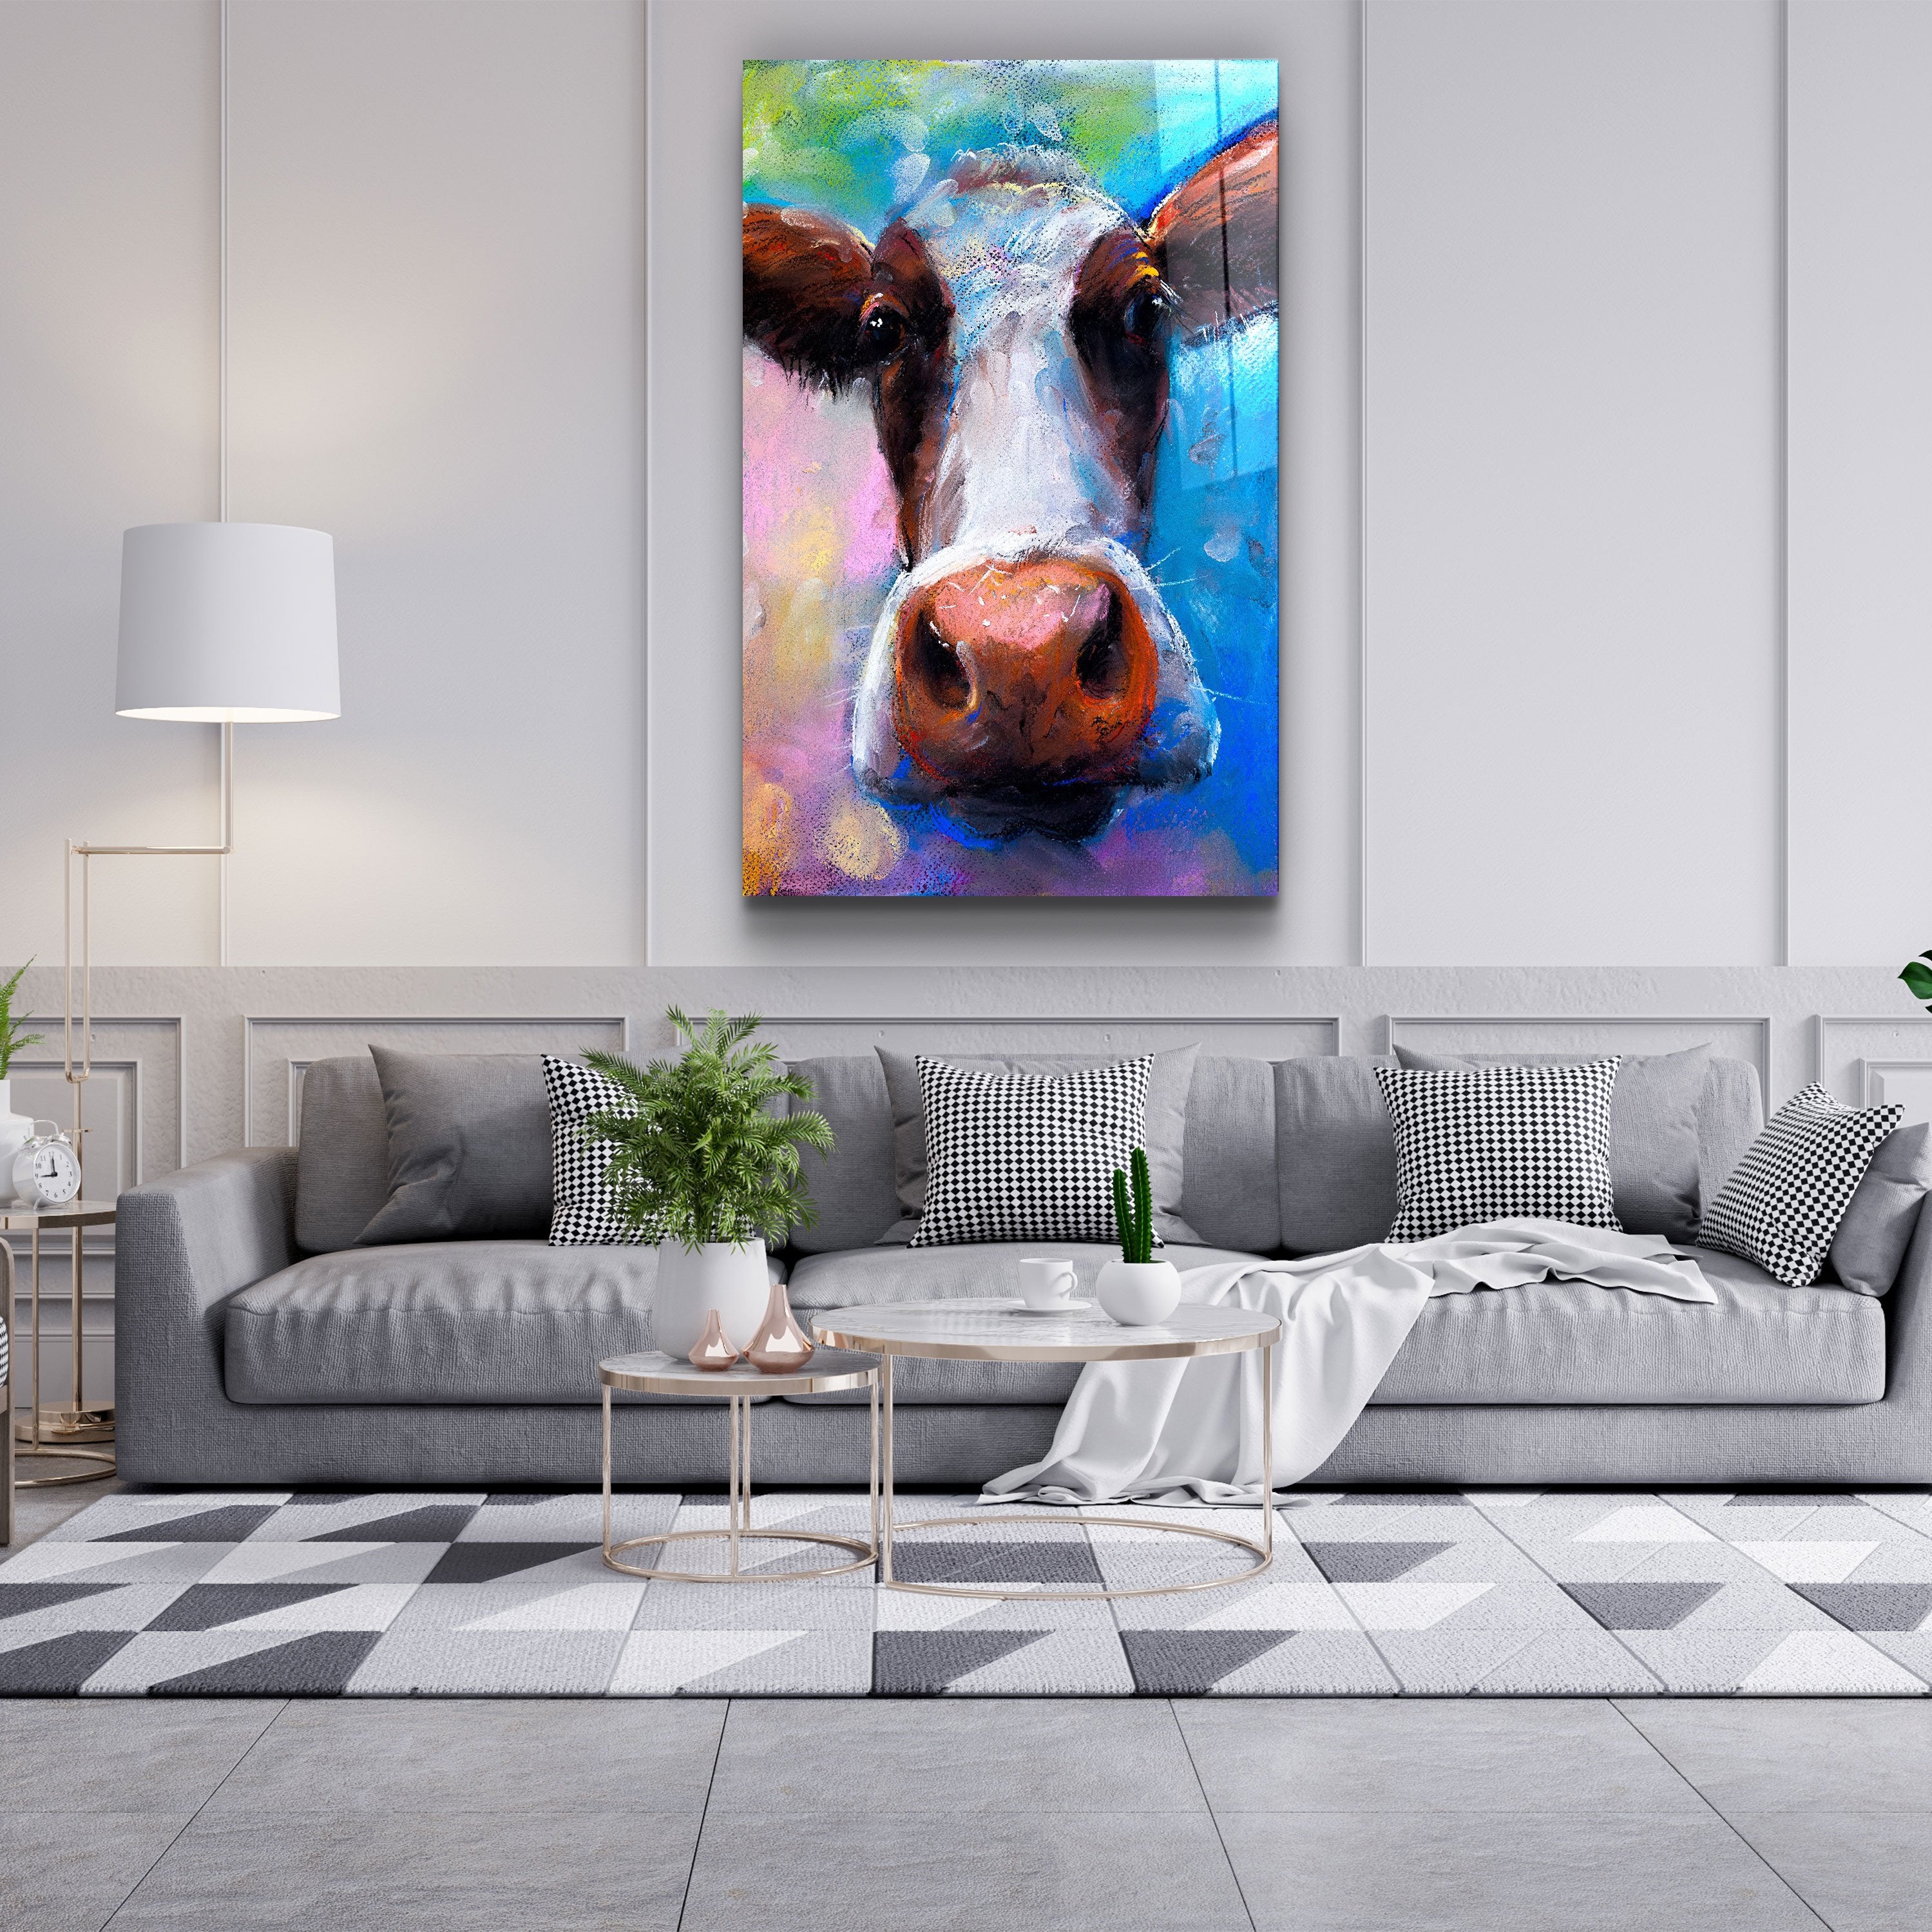 ・"Cow Smiling"・Glass Wall Art